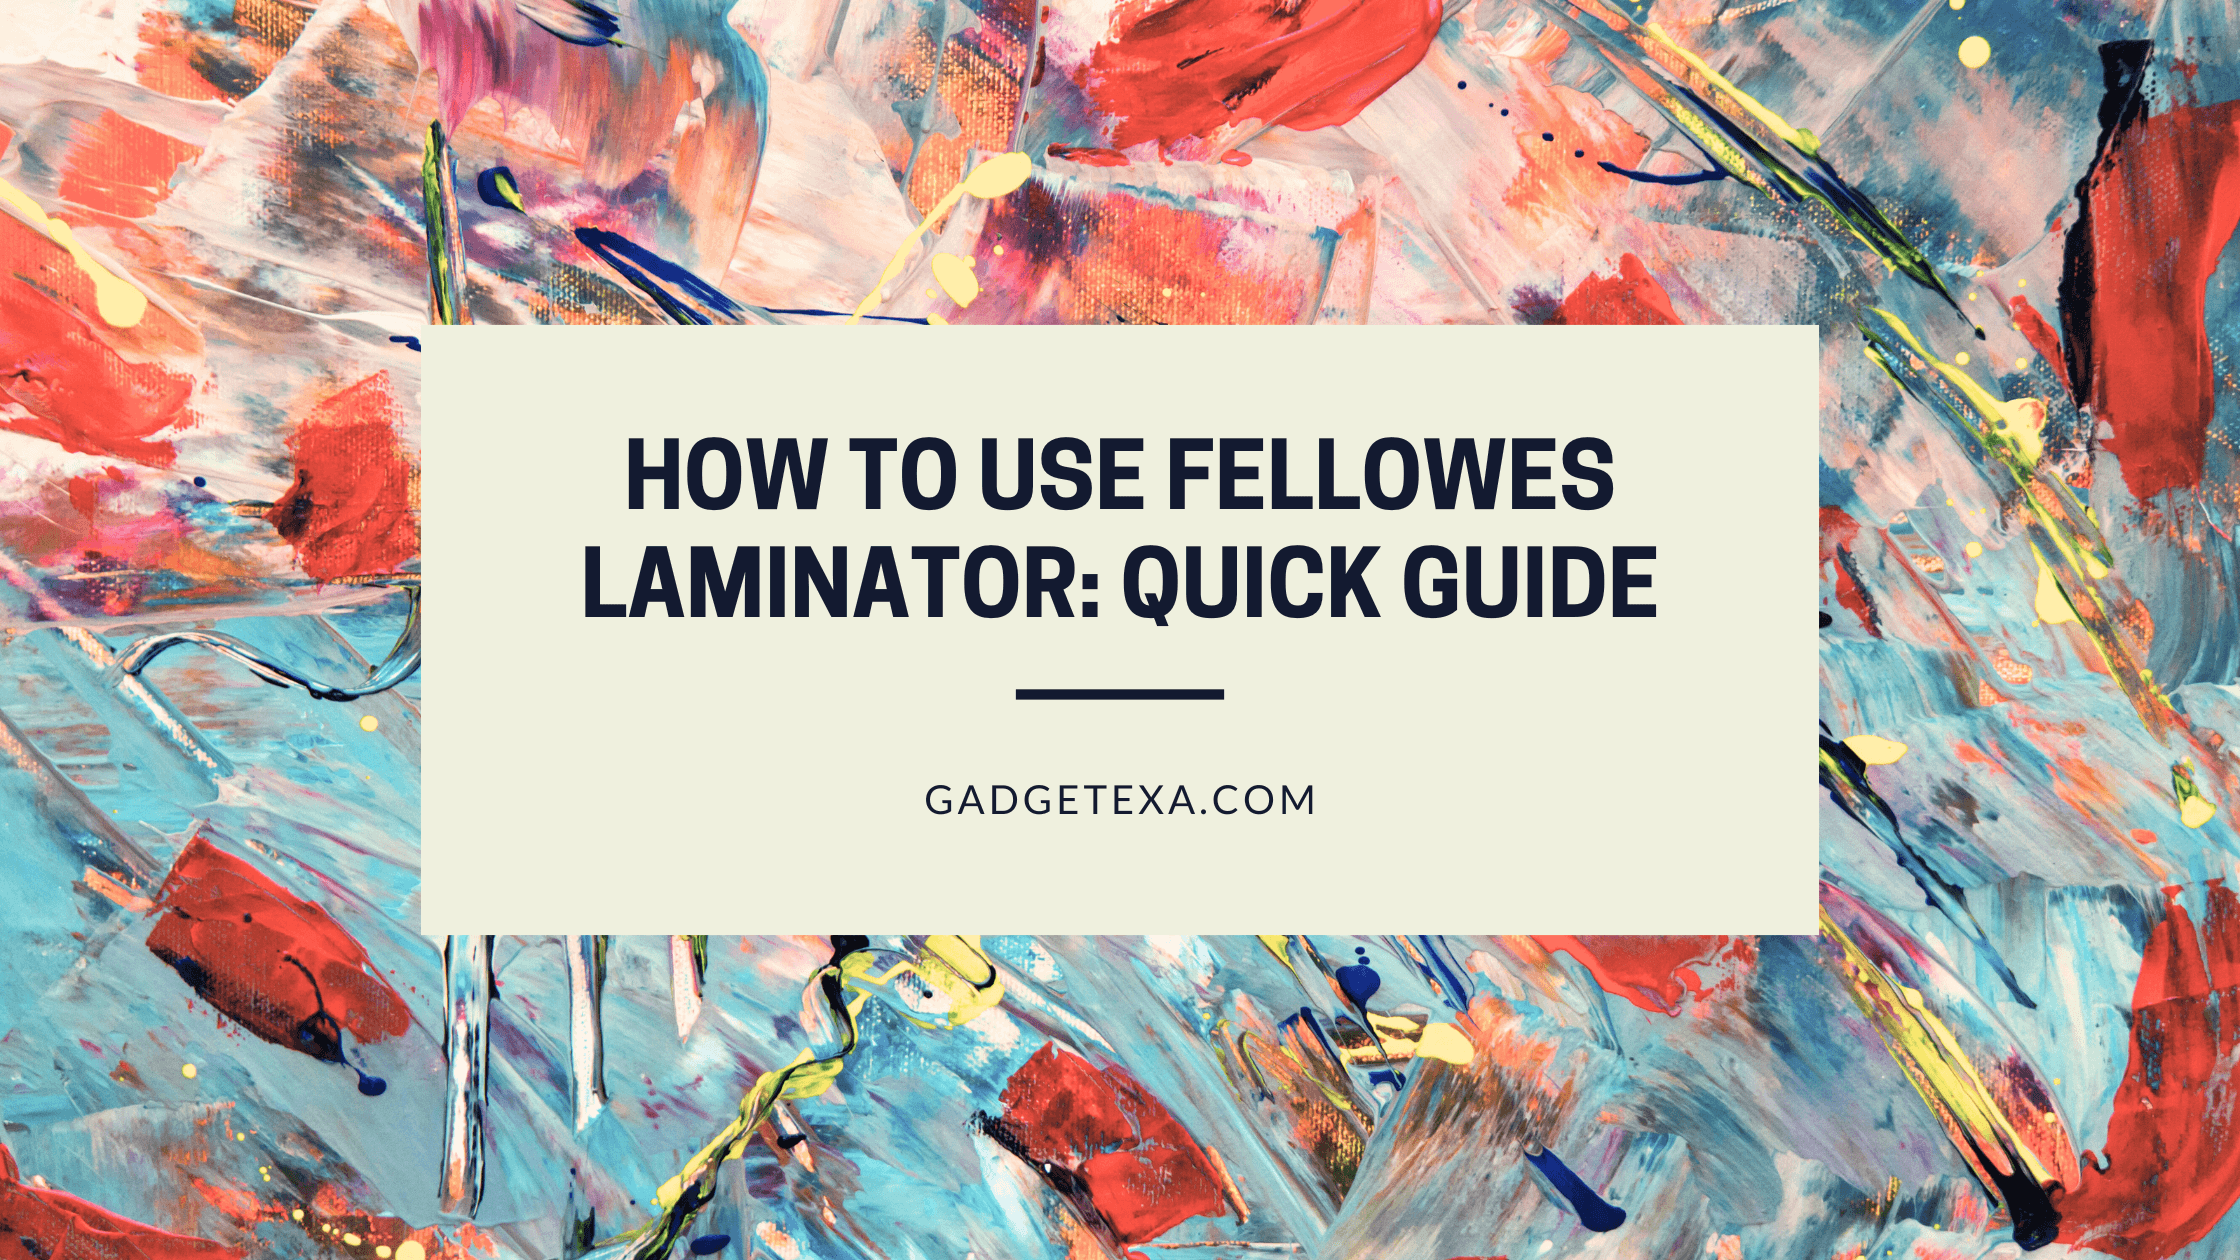 You are currently viewing How to Use Fellowes Laminator: Quick Guide